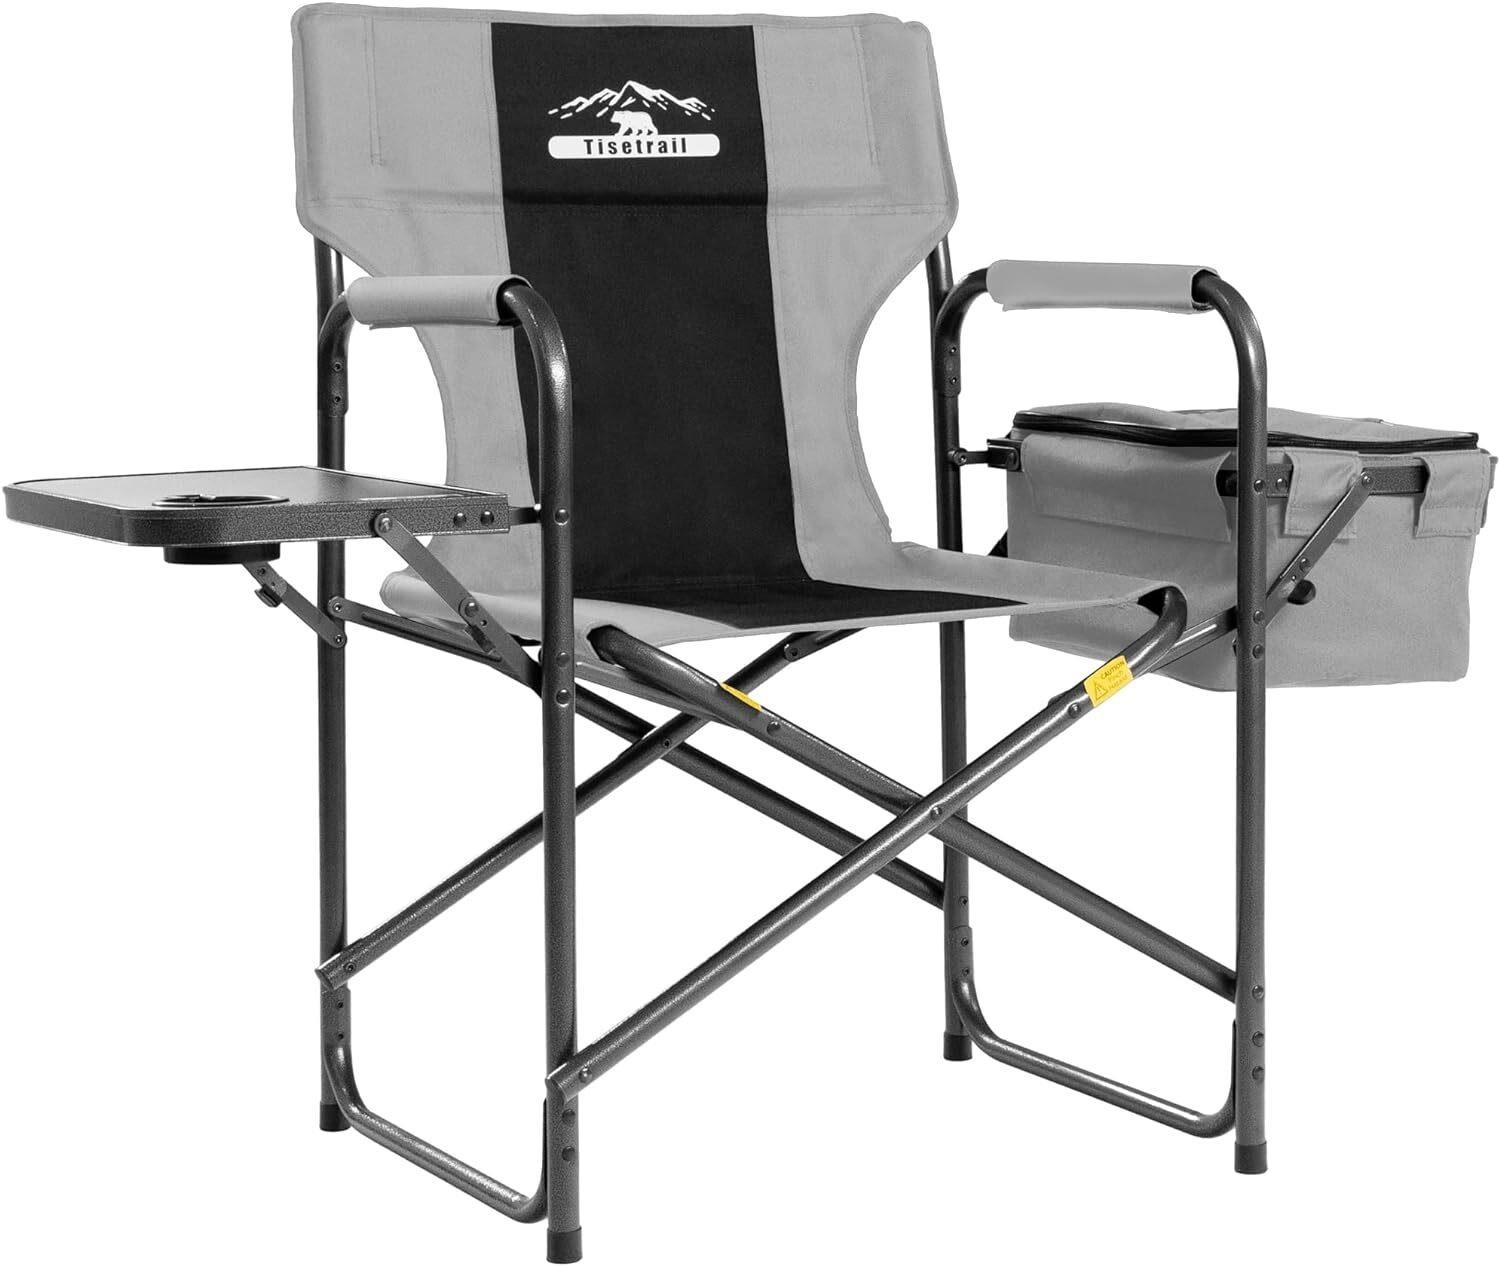 $70  Director Camping Chair w/ Cooler Bag  400lbs